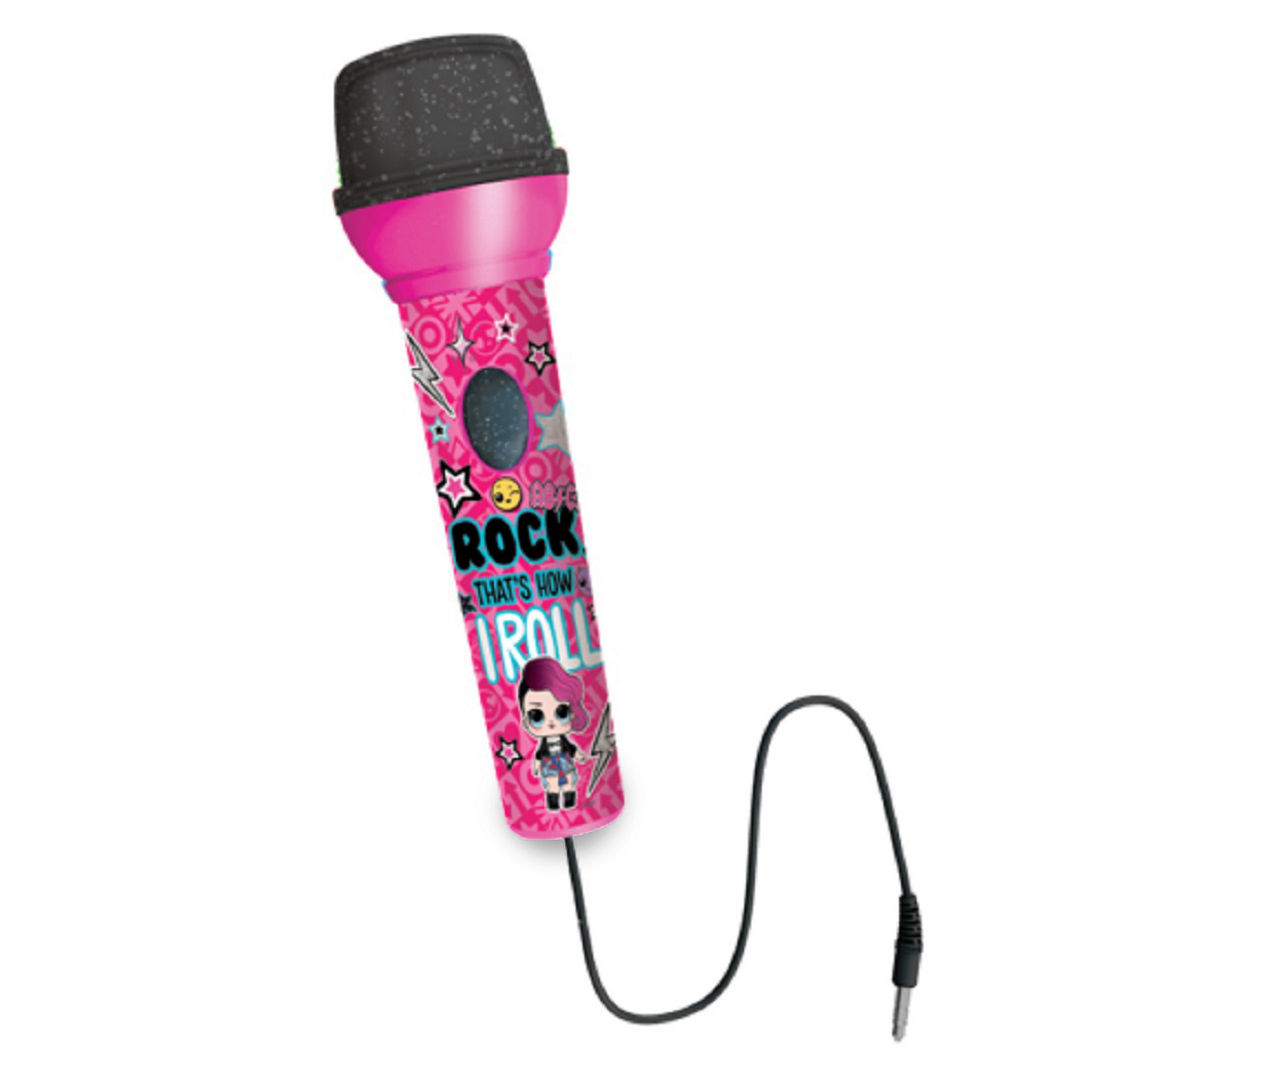 Grøn Lager knude L.O.L. Surprise! "Rock That's How I Roll" Sing Along Microphone | Big Lots